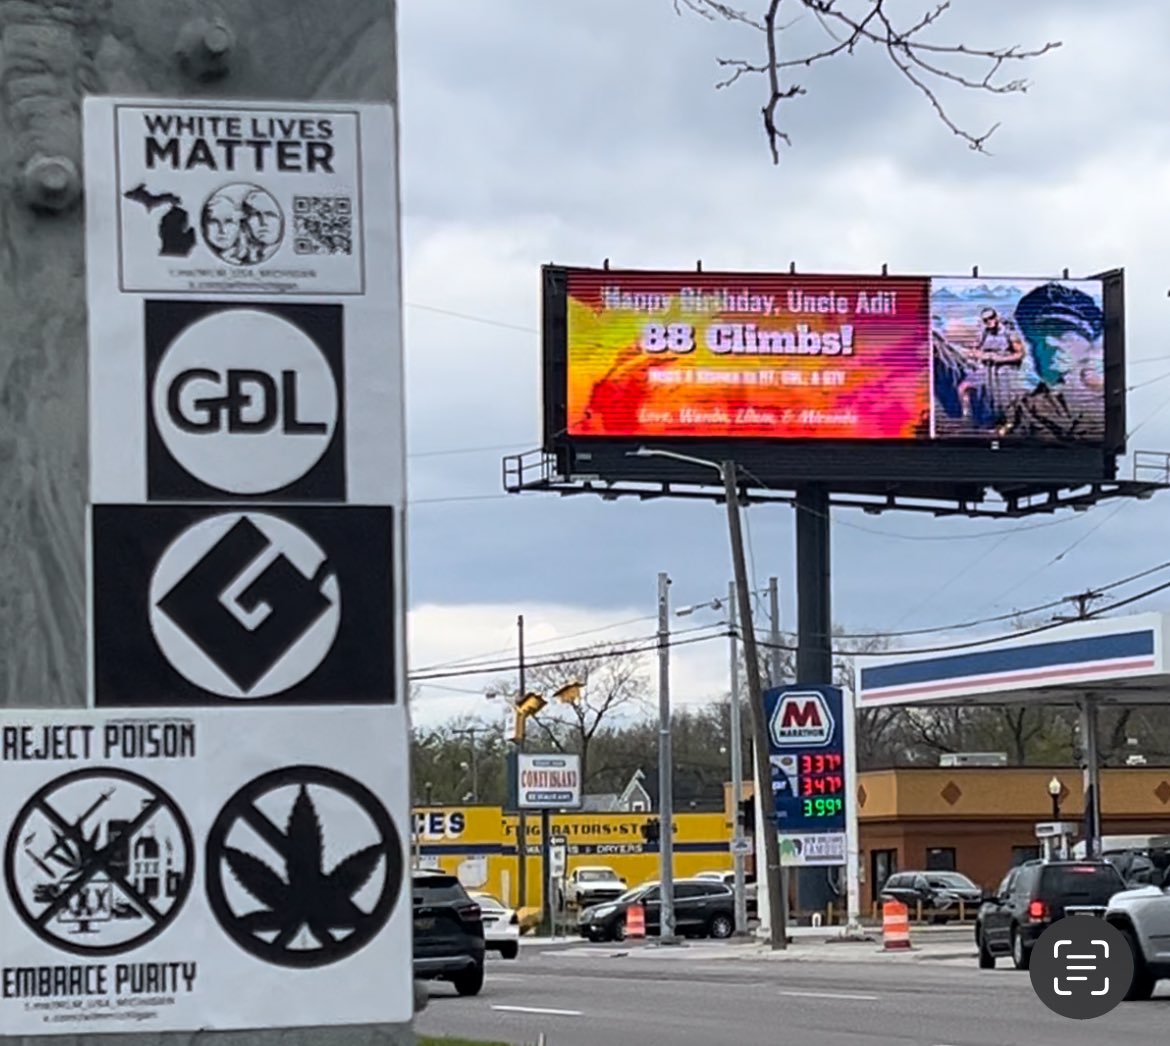 White Lives Matter Michigan permeated censorship to obtain three roadside billboards throughout Southeastern Michigan to dog-whistle morale boosting messages to pro-Whites for this 4/20 Day of Action! Can you find and recognize all the dog whistles? @TCohenbergstein